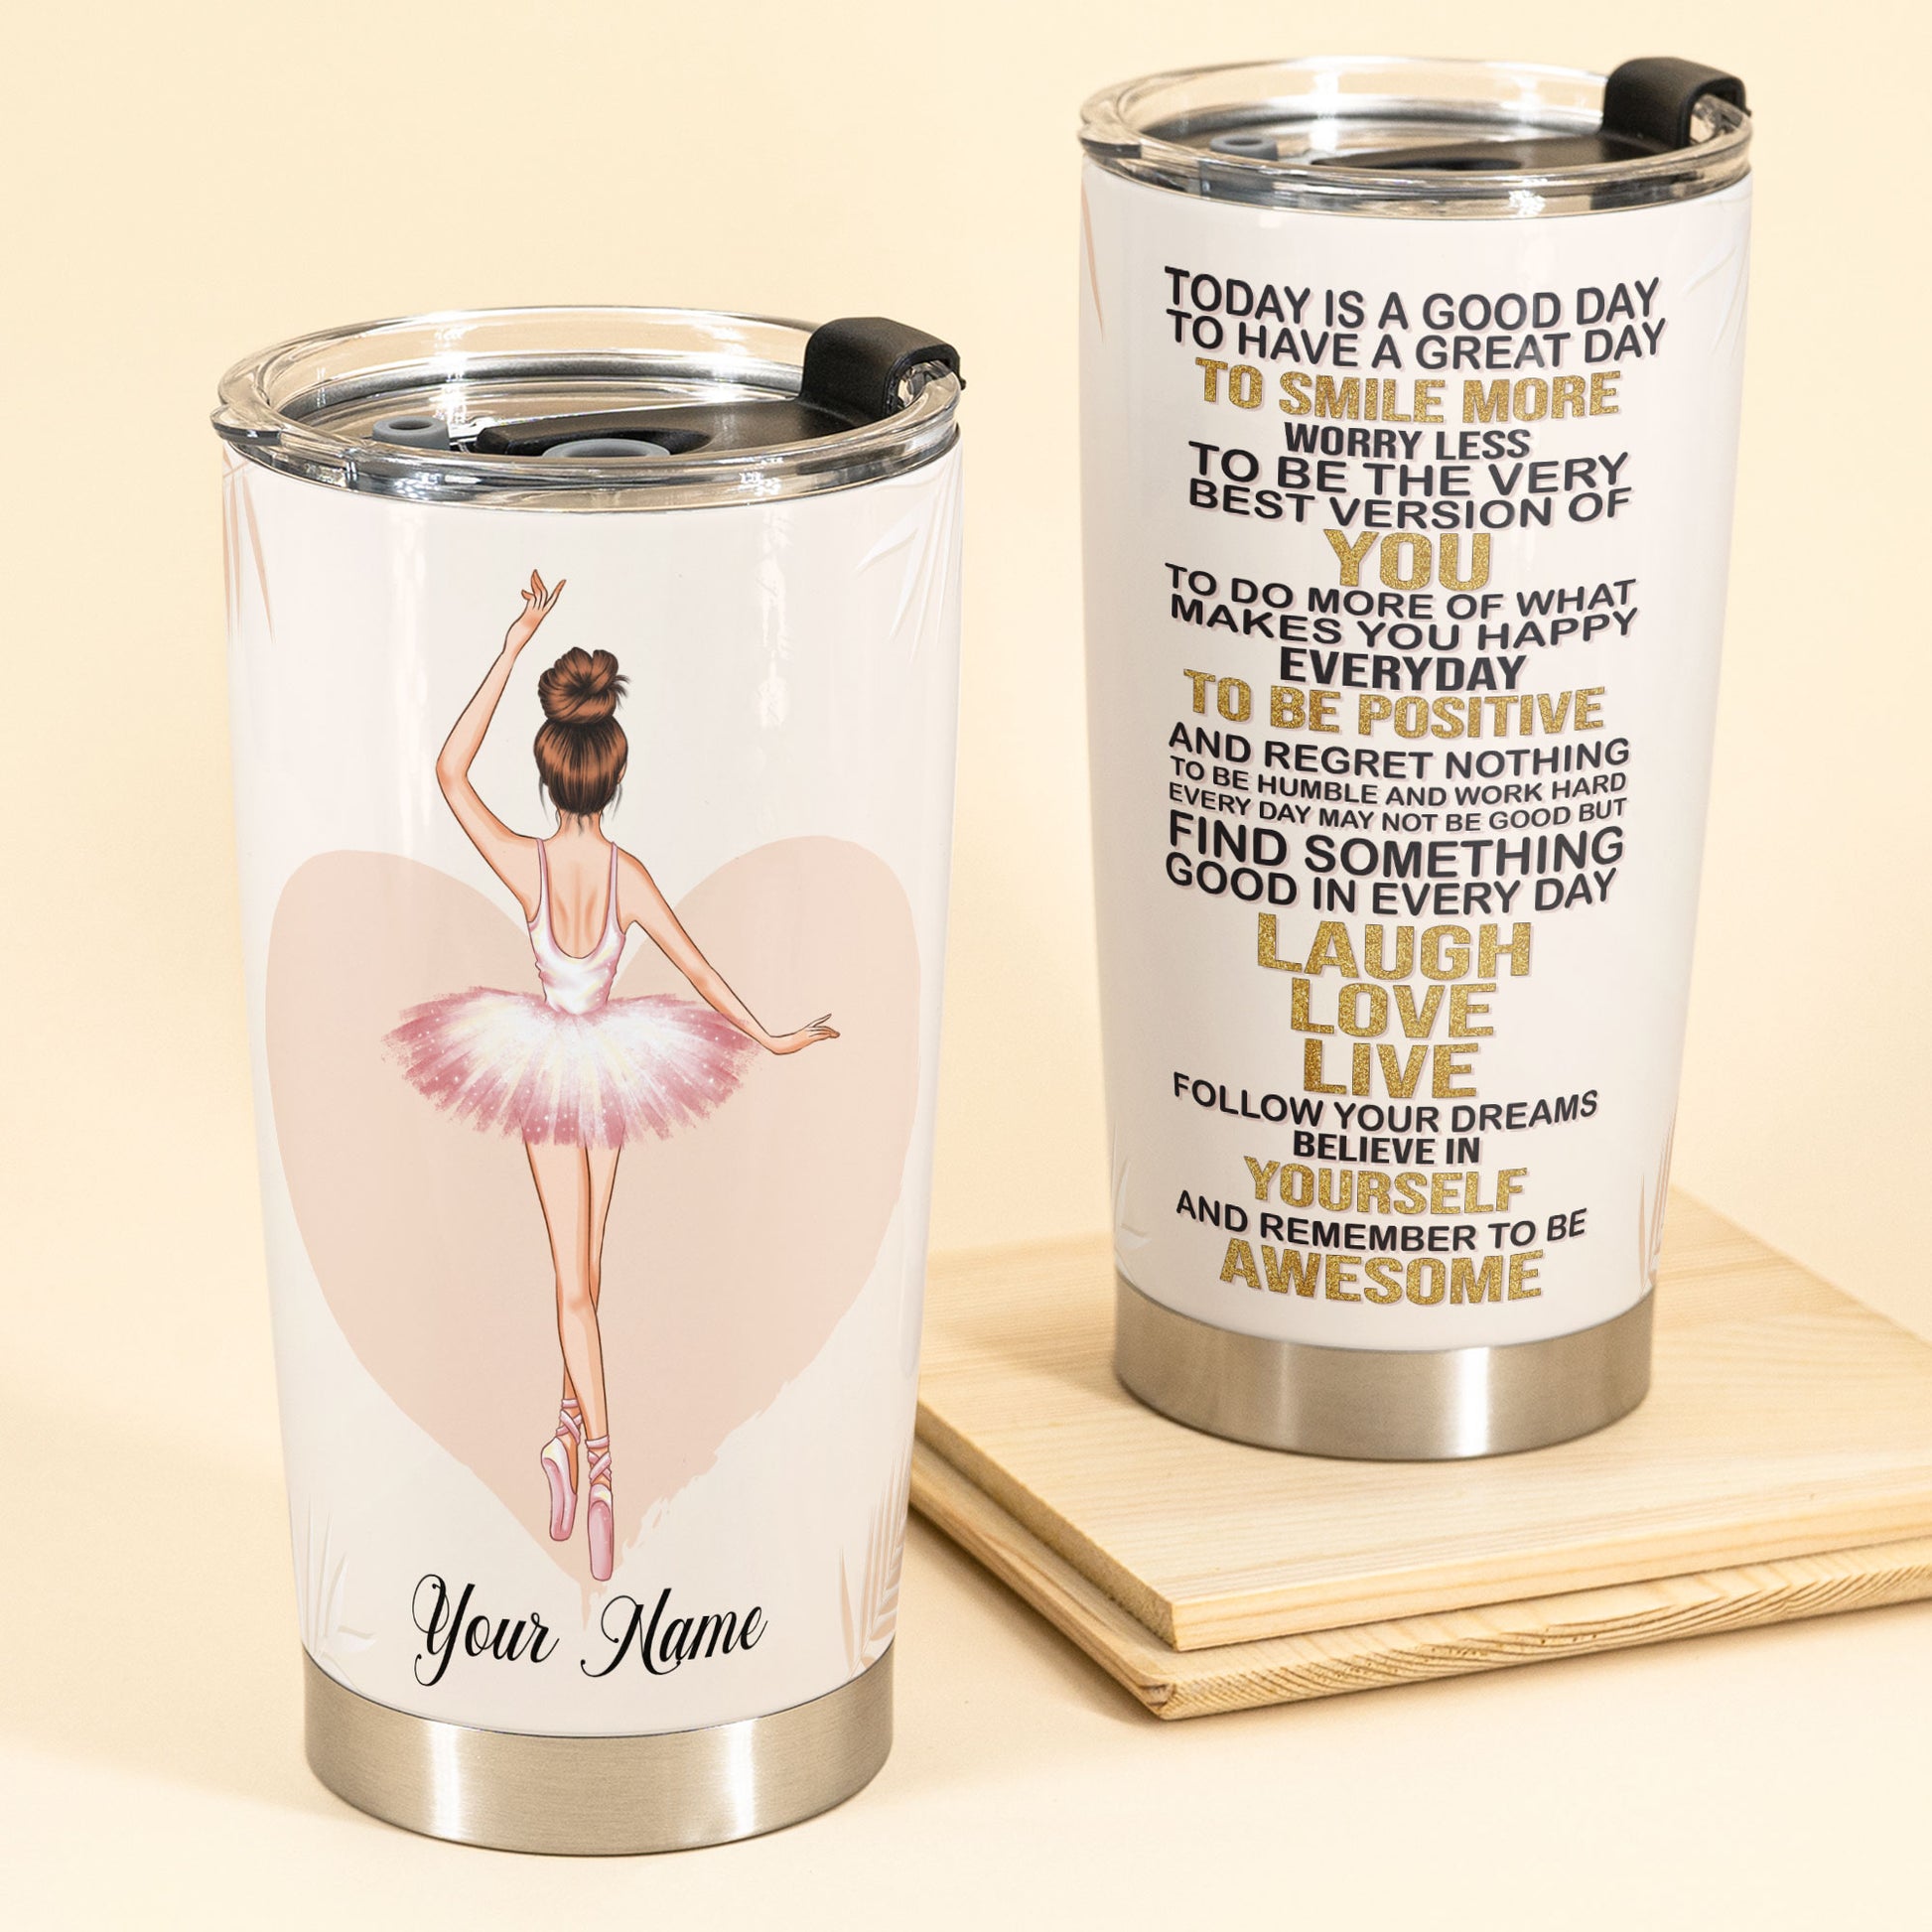 Today Is A Good Day - Personalized Tumbler Cup - Gift For Ballet Dancer, Ballerina